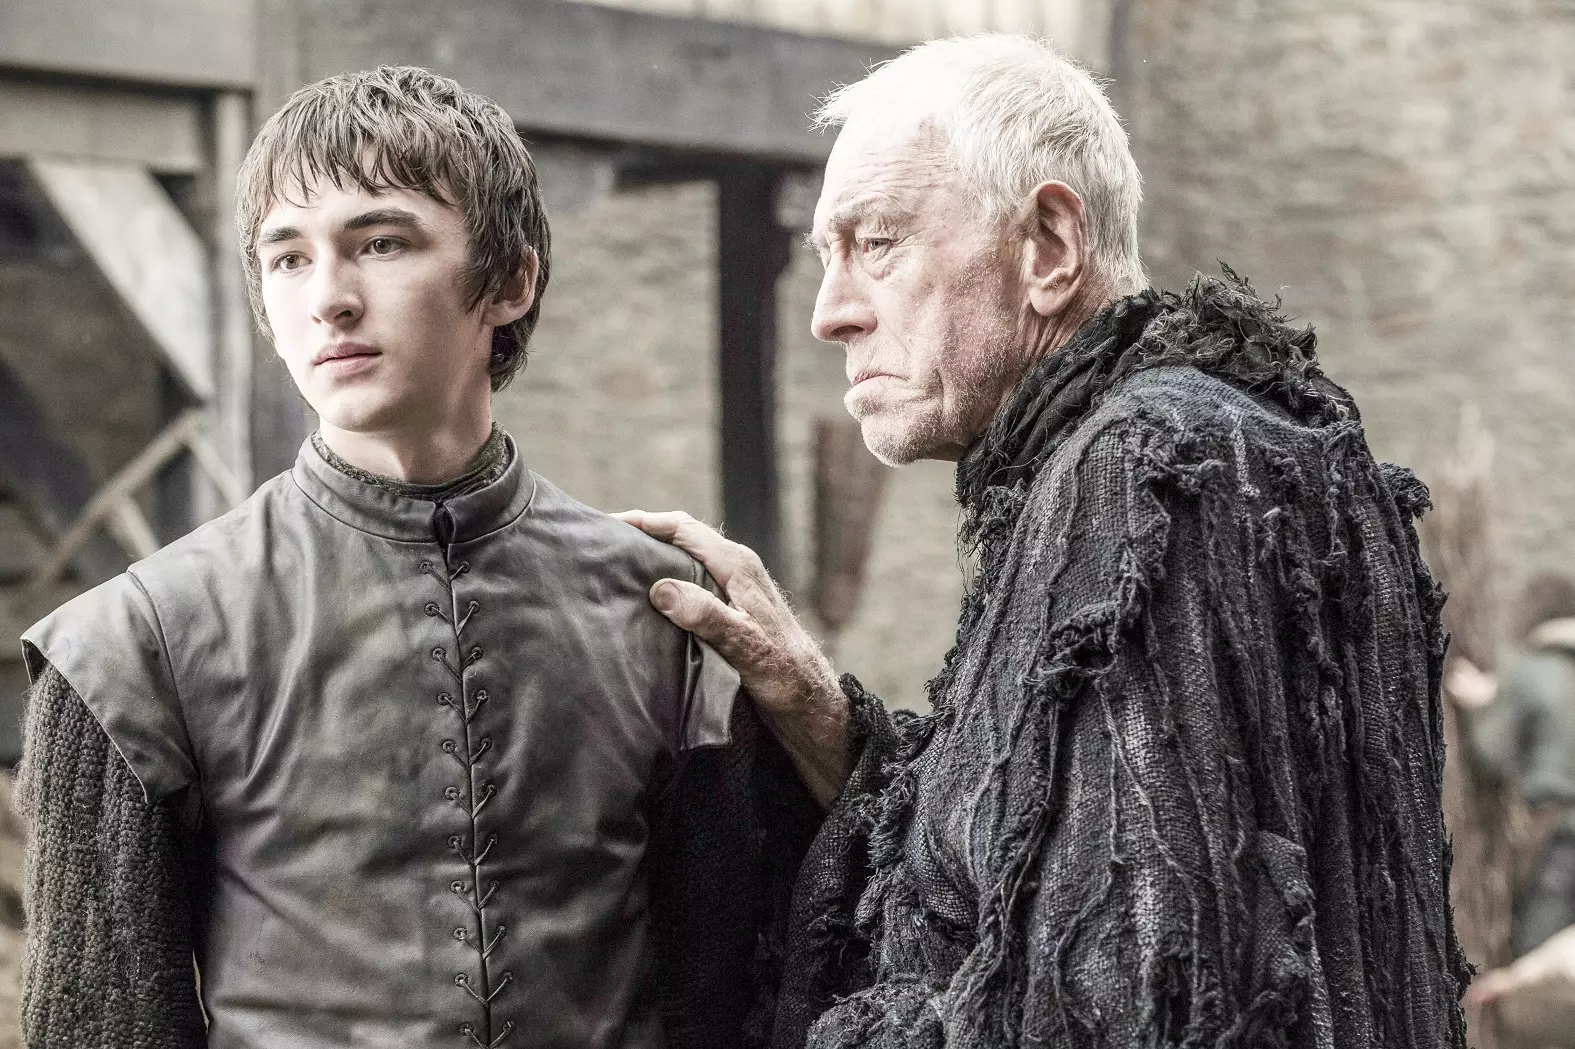 Some Stuff You Might Have Missed During Bran's Flashbacks On 'Game Of Thrones'